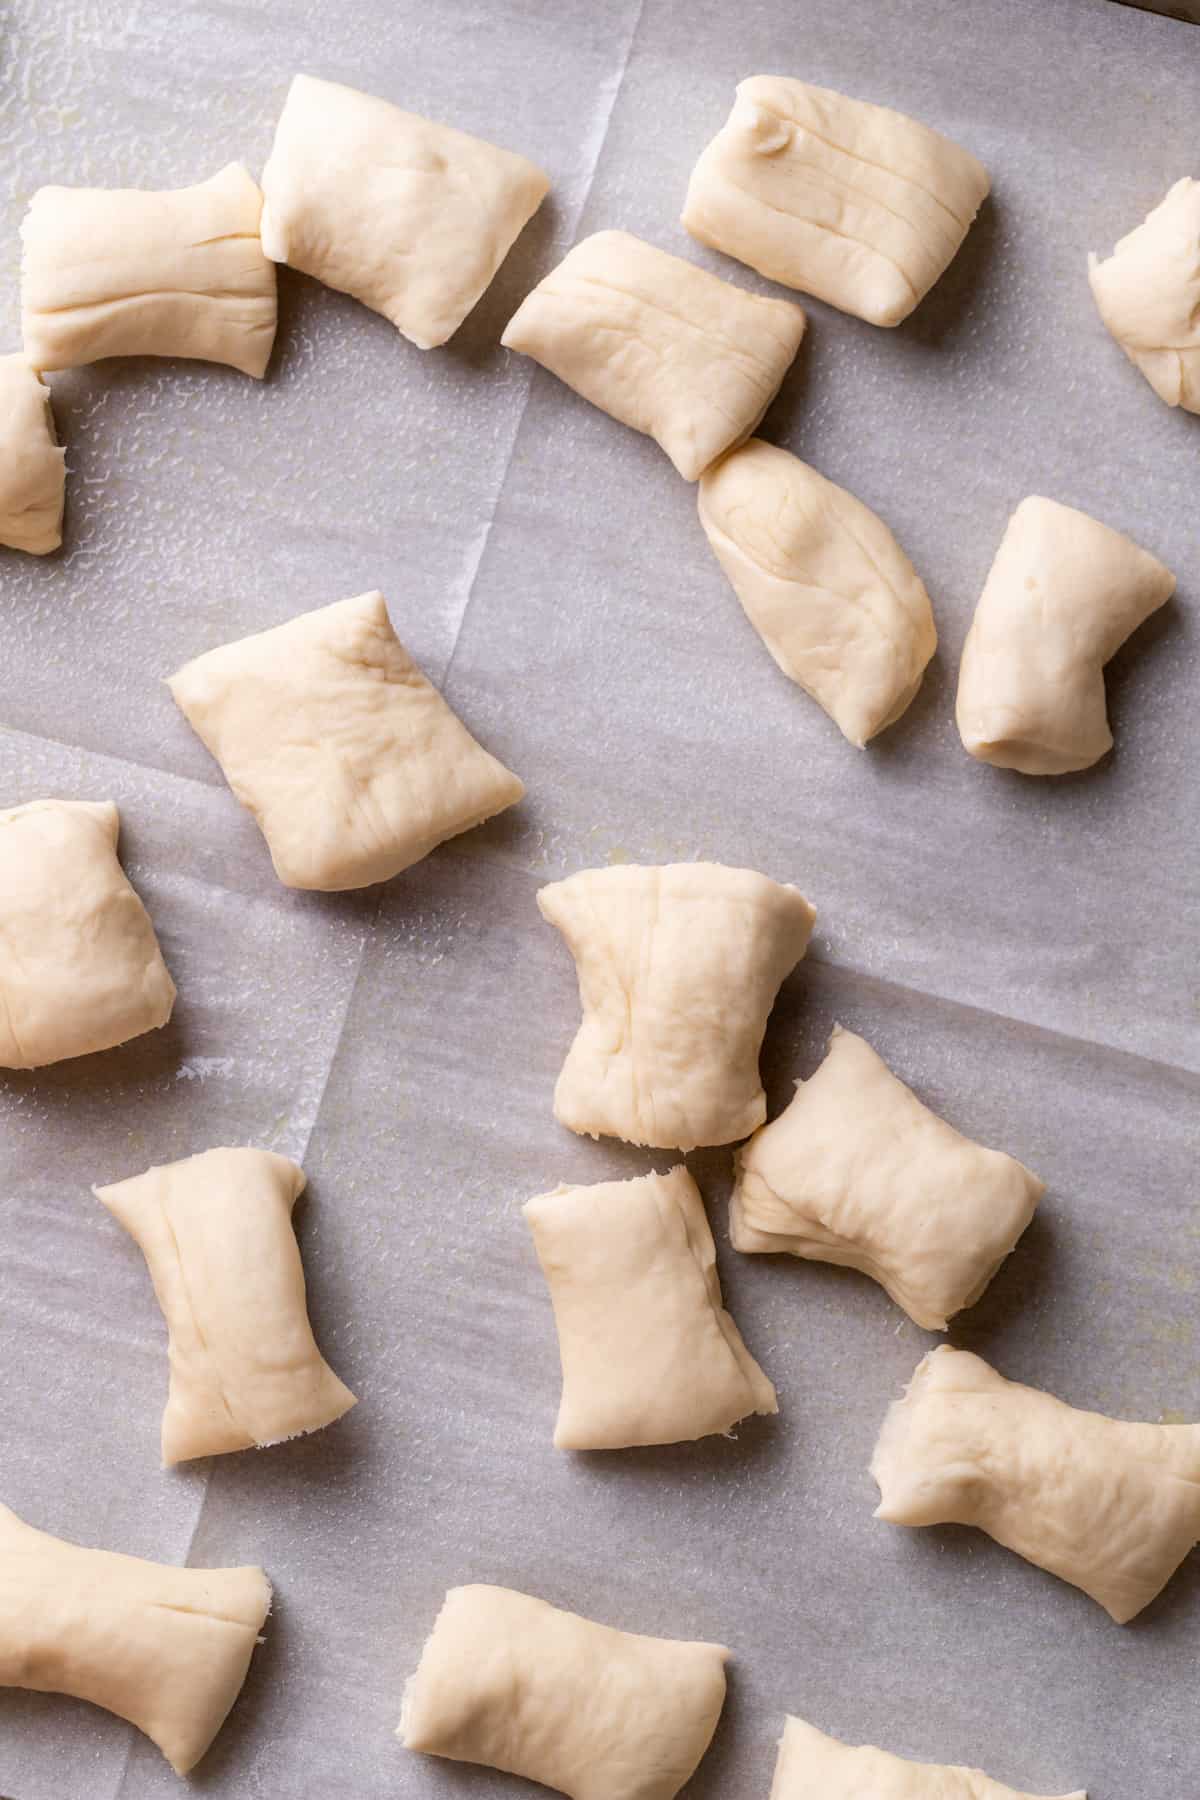 Raw pieces of dough on parchment paper.